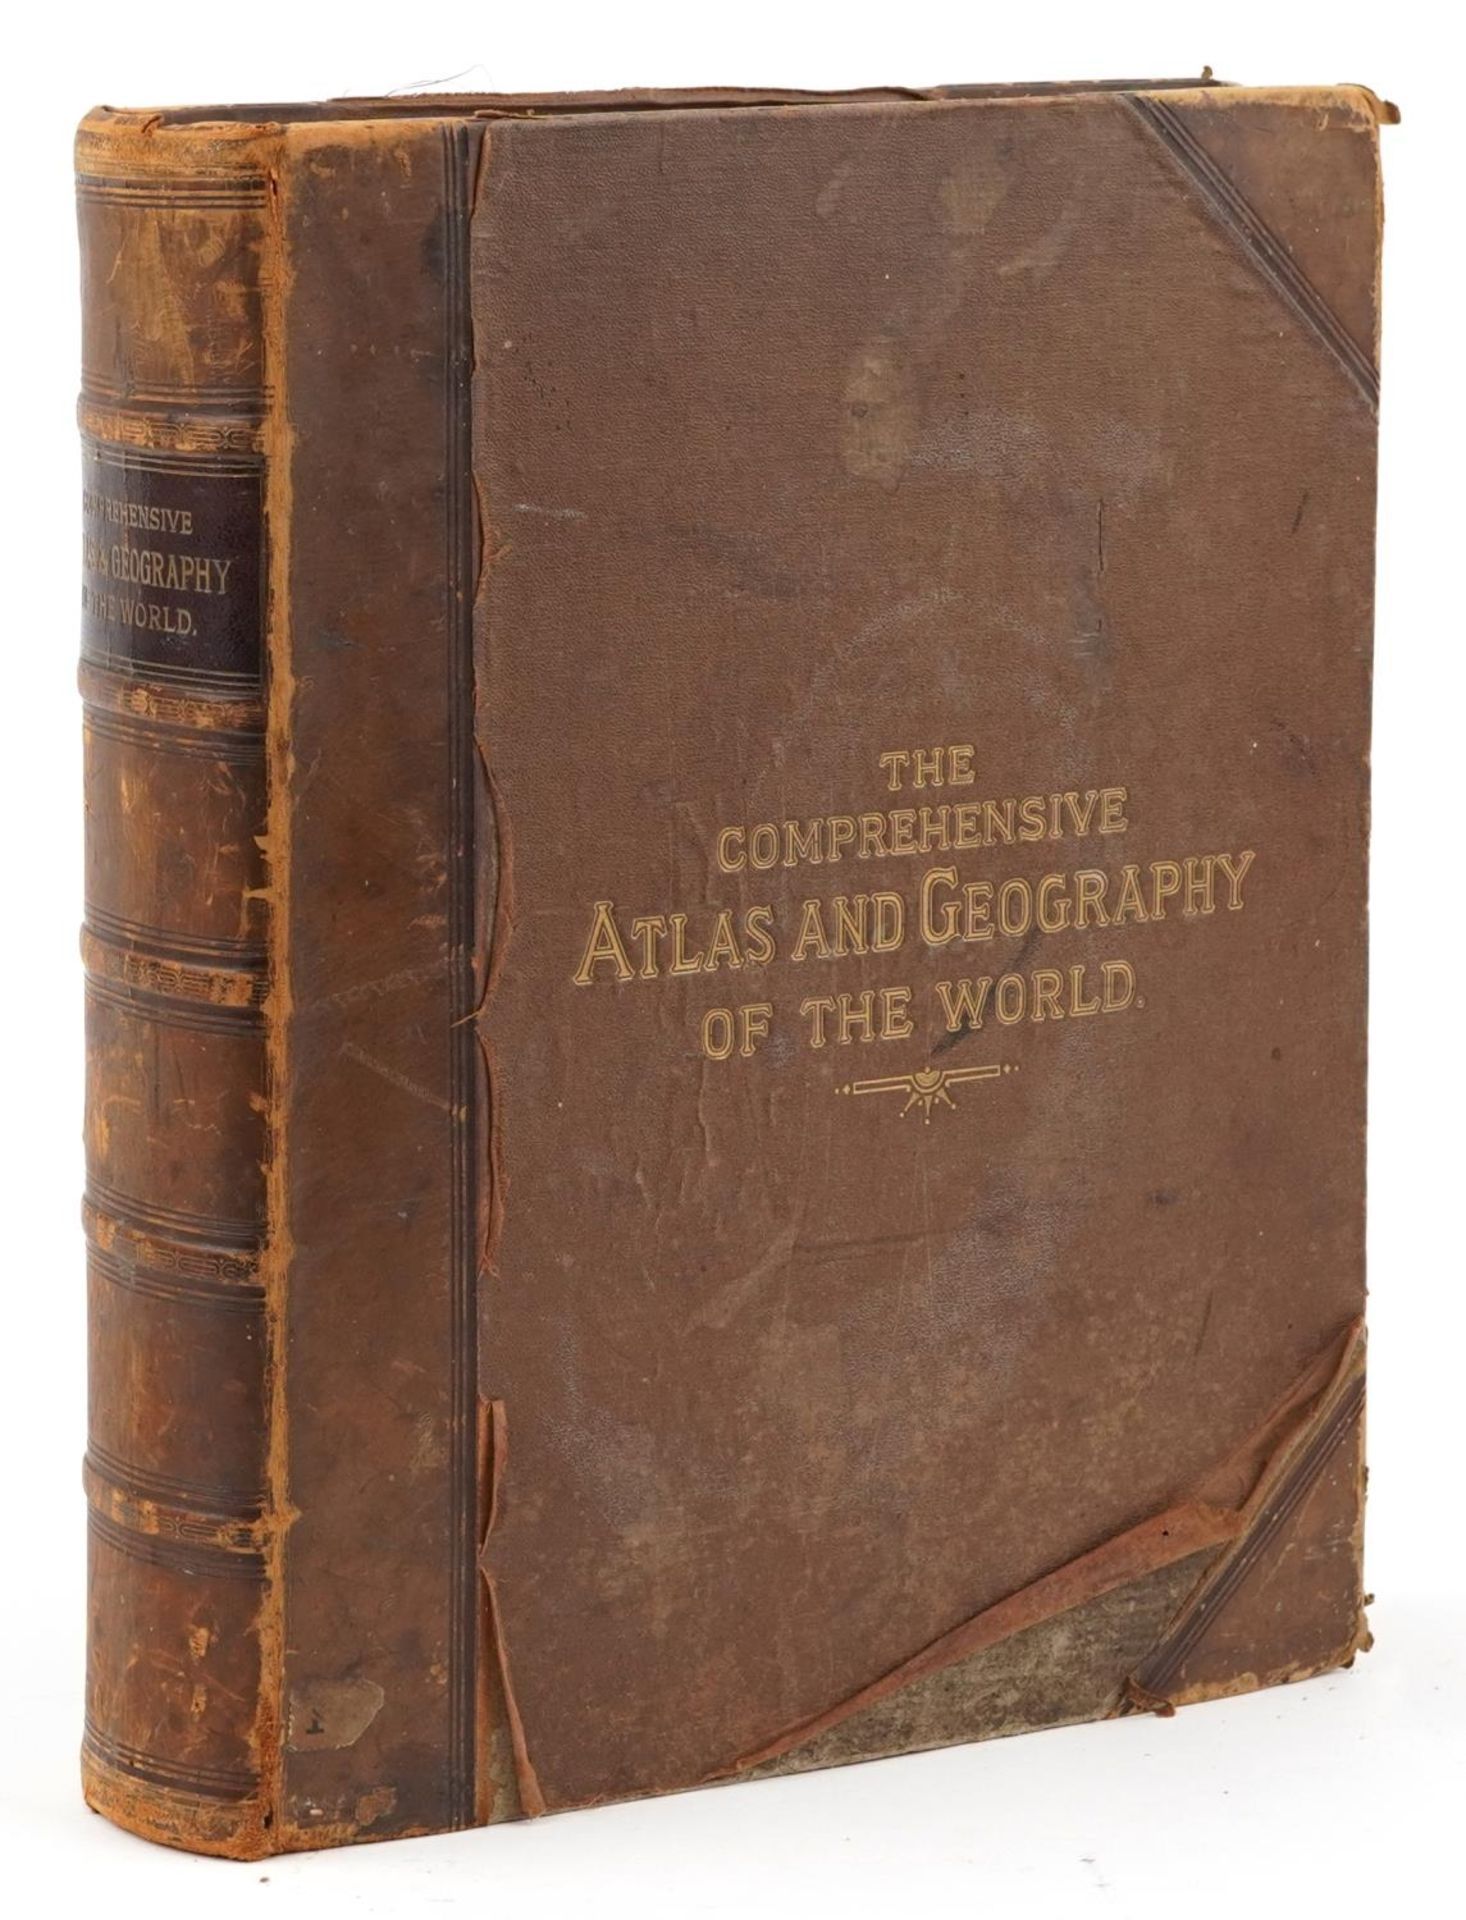 The Comprehensive Atlas & Geography of the World, hardback book with maps and plates by W G Blackie,